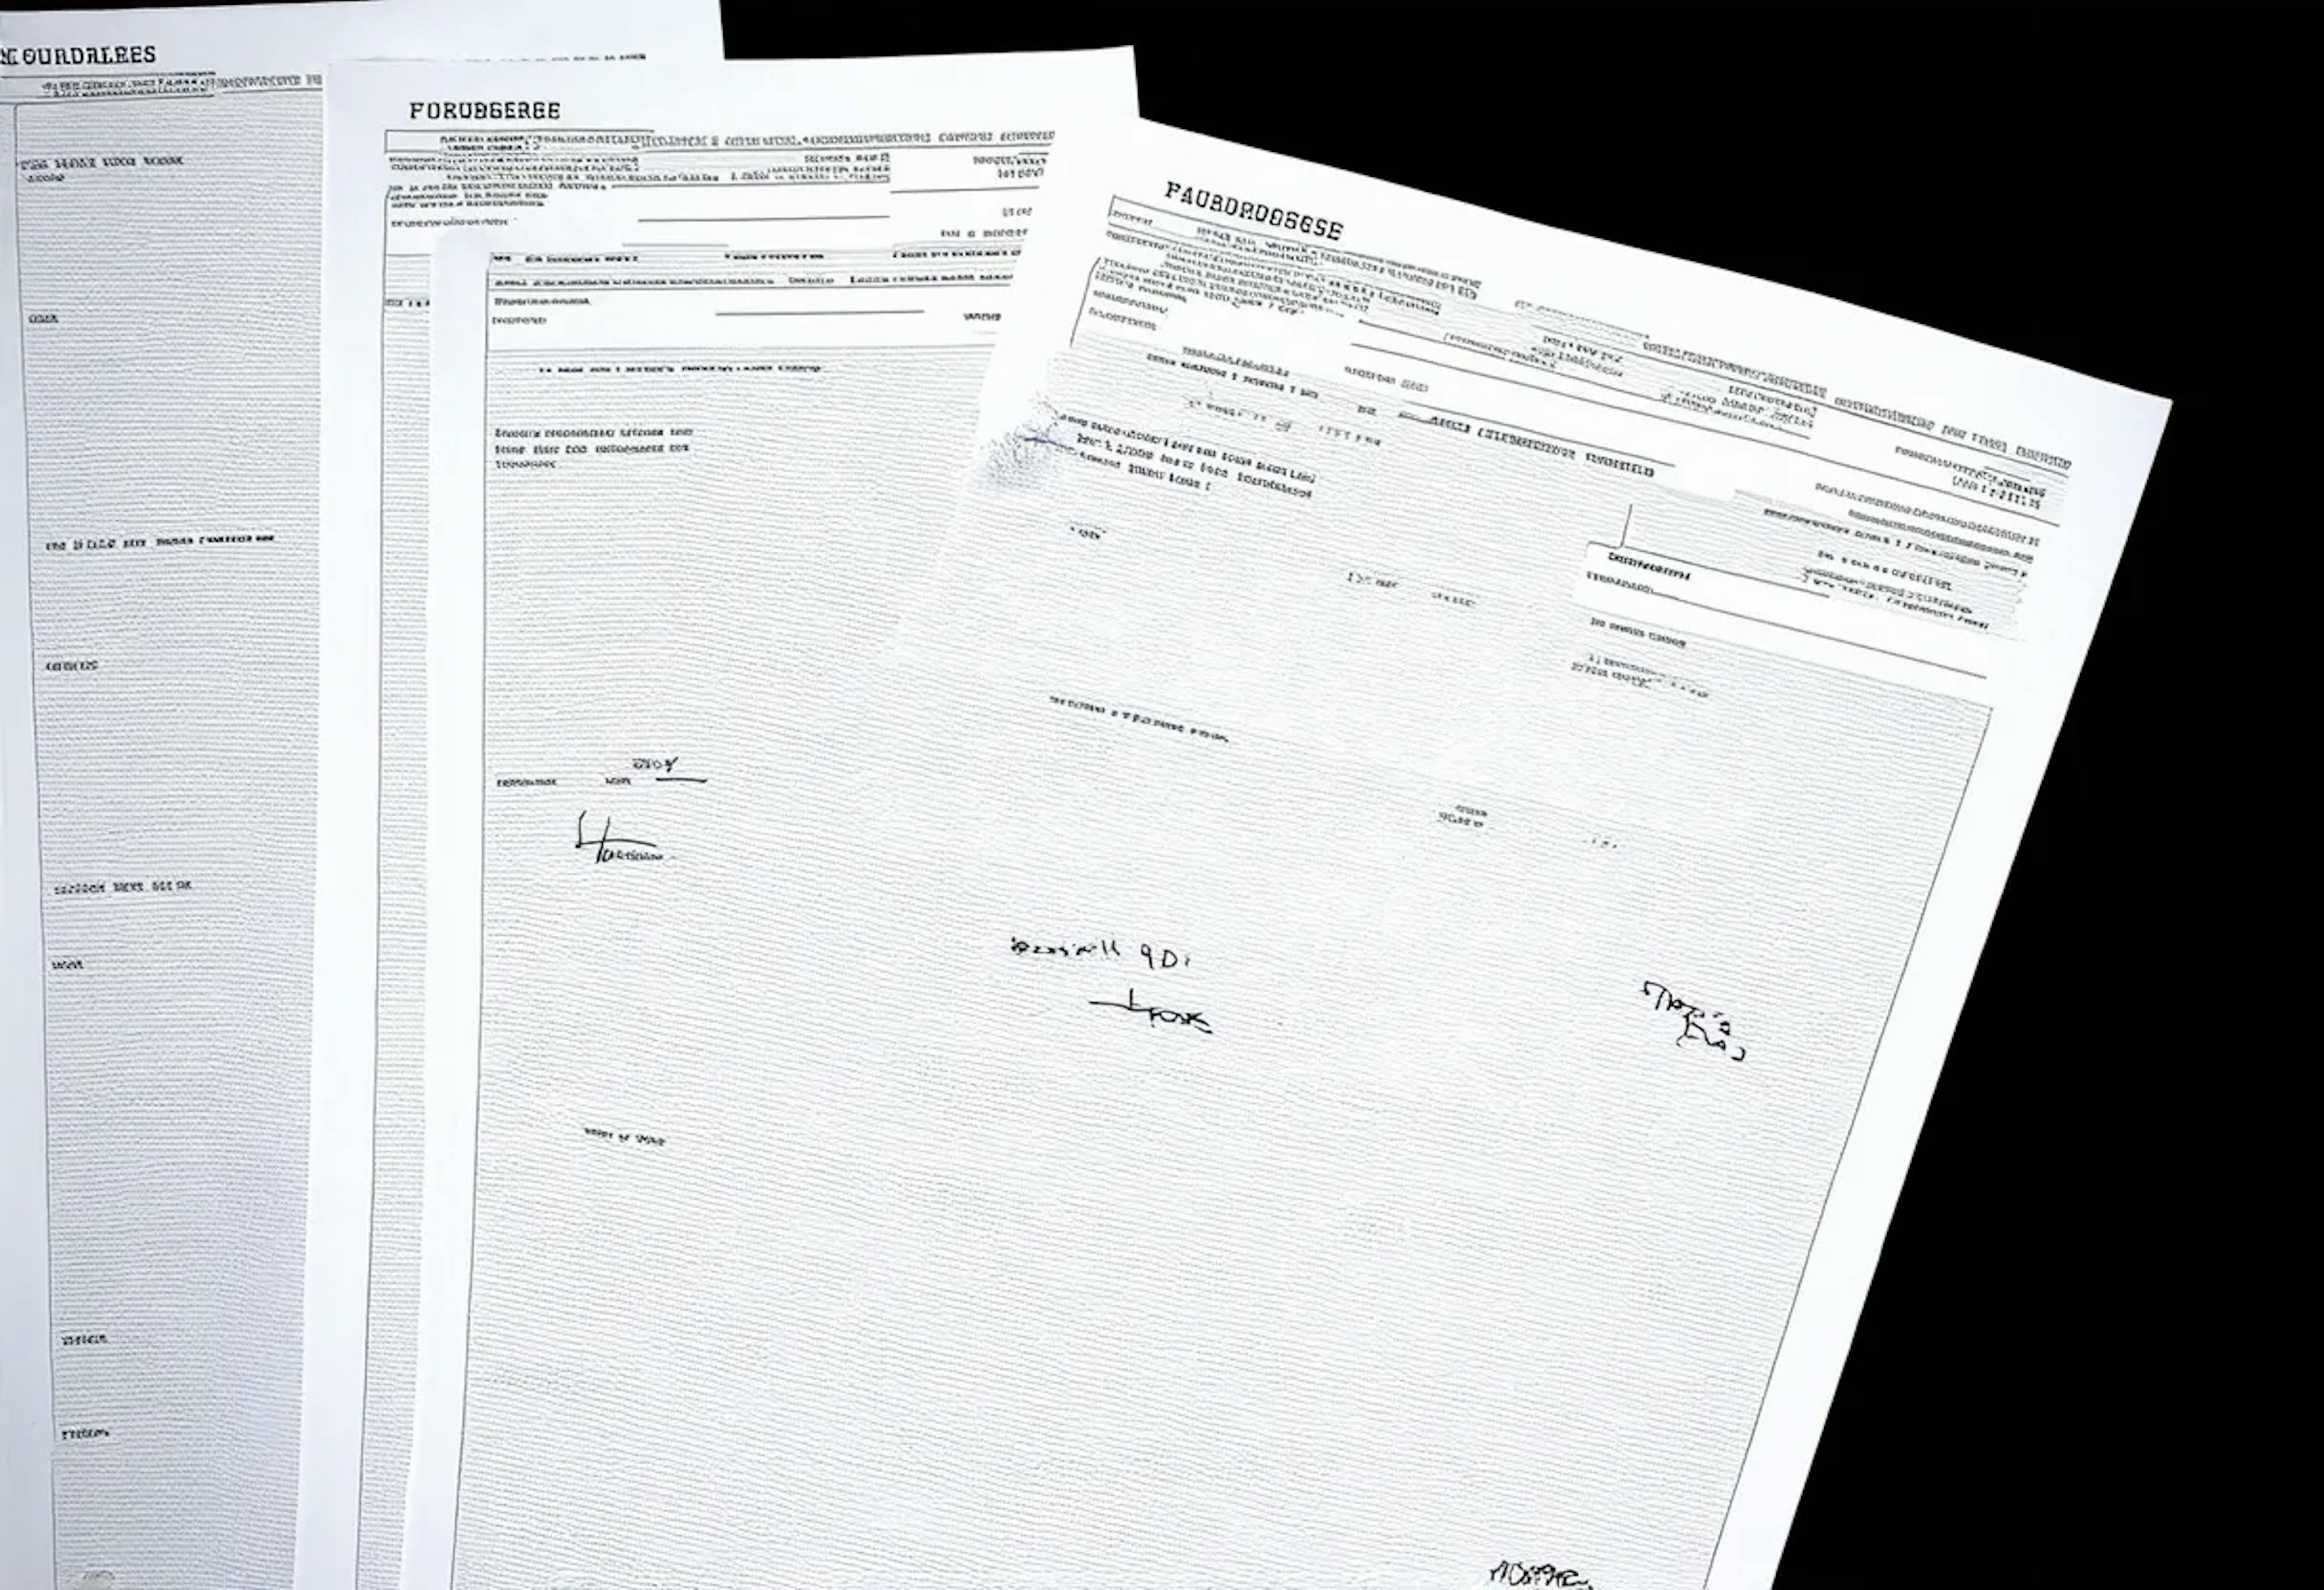 featured image - Craig Wright's Bitcoin White Paper Document Questioned for Forgery